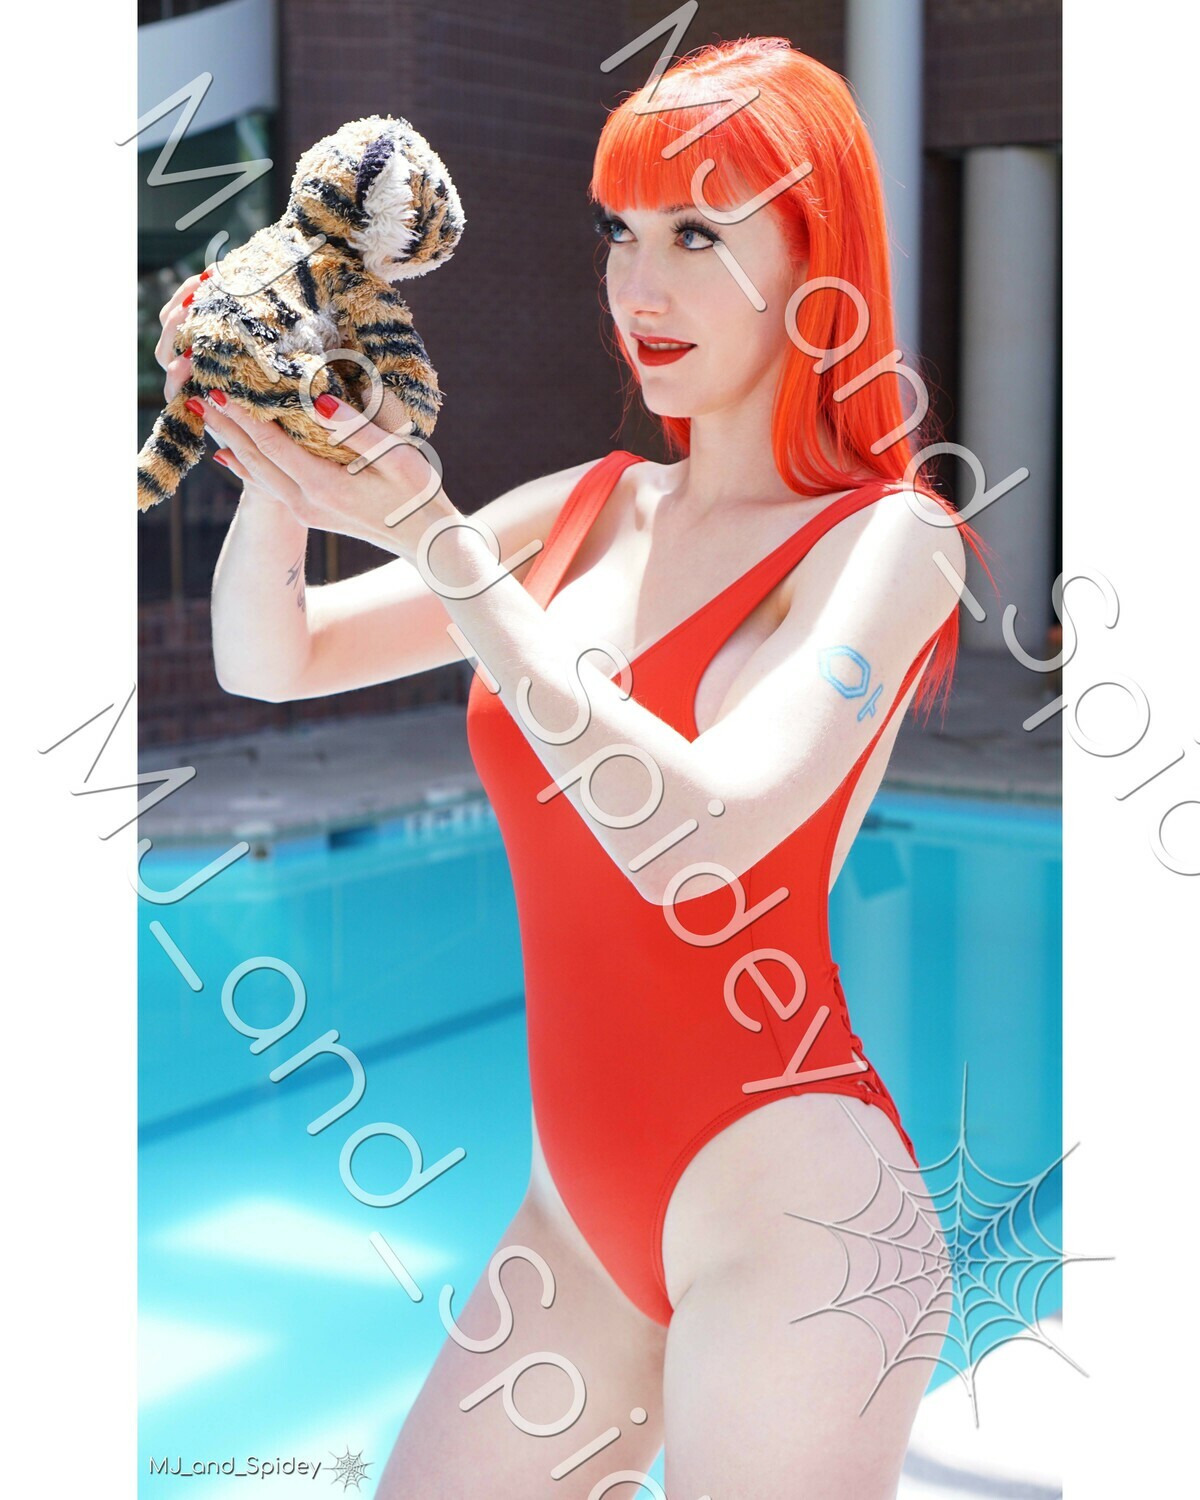 Marvel - Spider-Man - Mary Jane Watson - Swimsuit 3 - Digital Cosplay Image (@MJ_and_Spidey, MJ and Spidey, Comics)